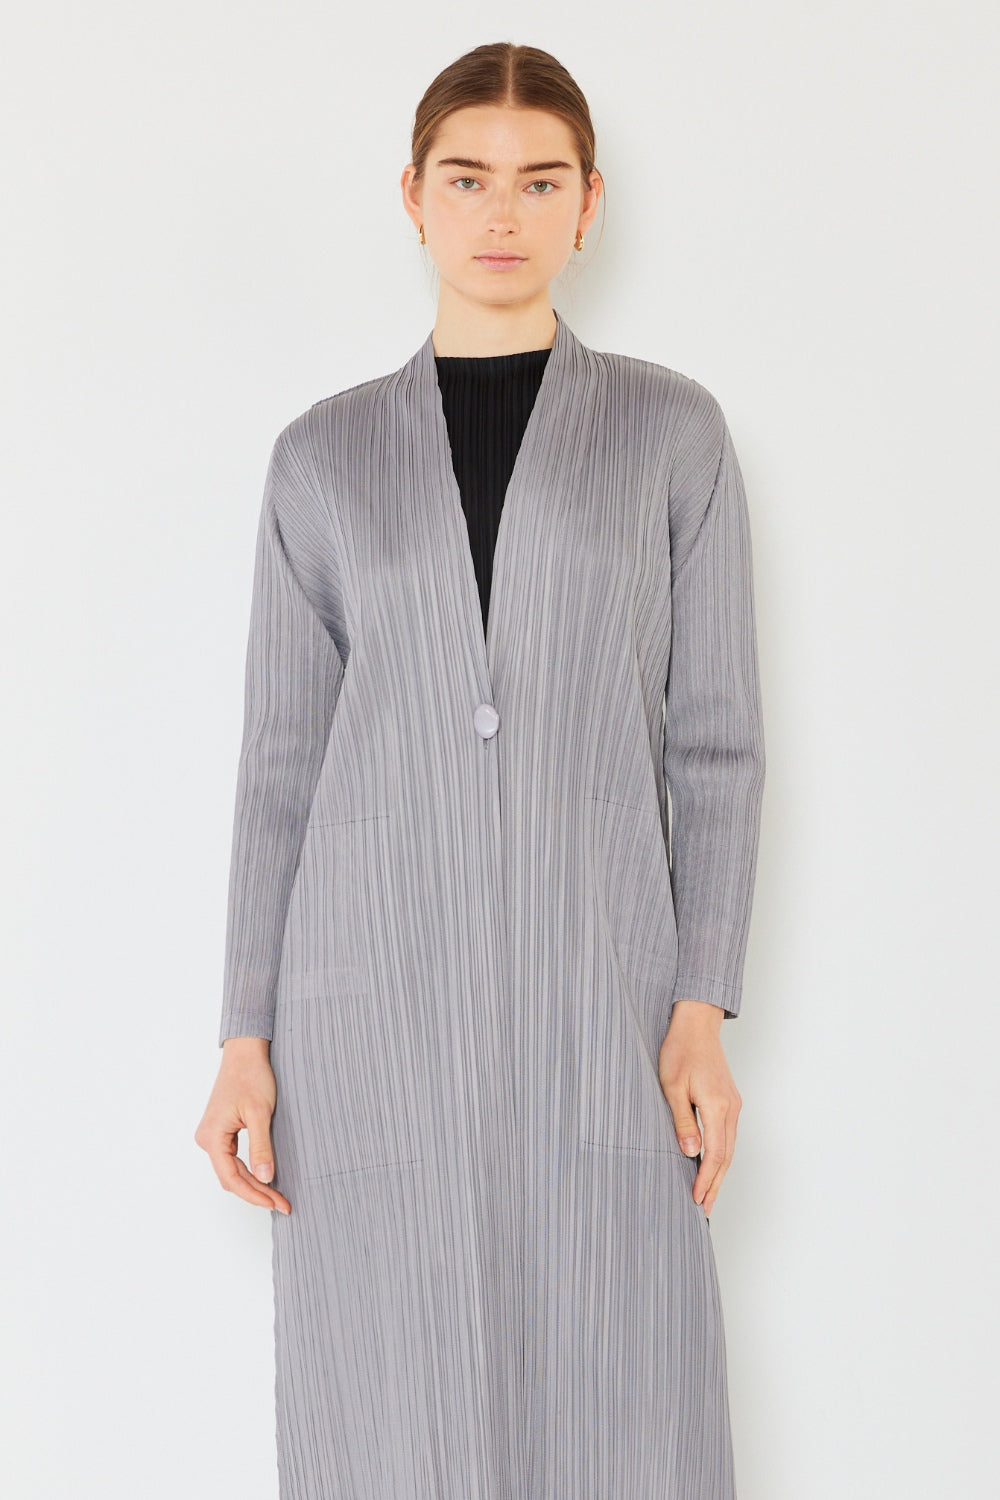 The Pleated Long Sleeve Cardigan is a versatile and chic layering piece for your wardrobe. With its pleated detailing and long sleeves, this cardigan offers a stylish and sophisticated look. The pleats add texture and visual interest to the classic cardigan design. 